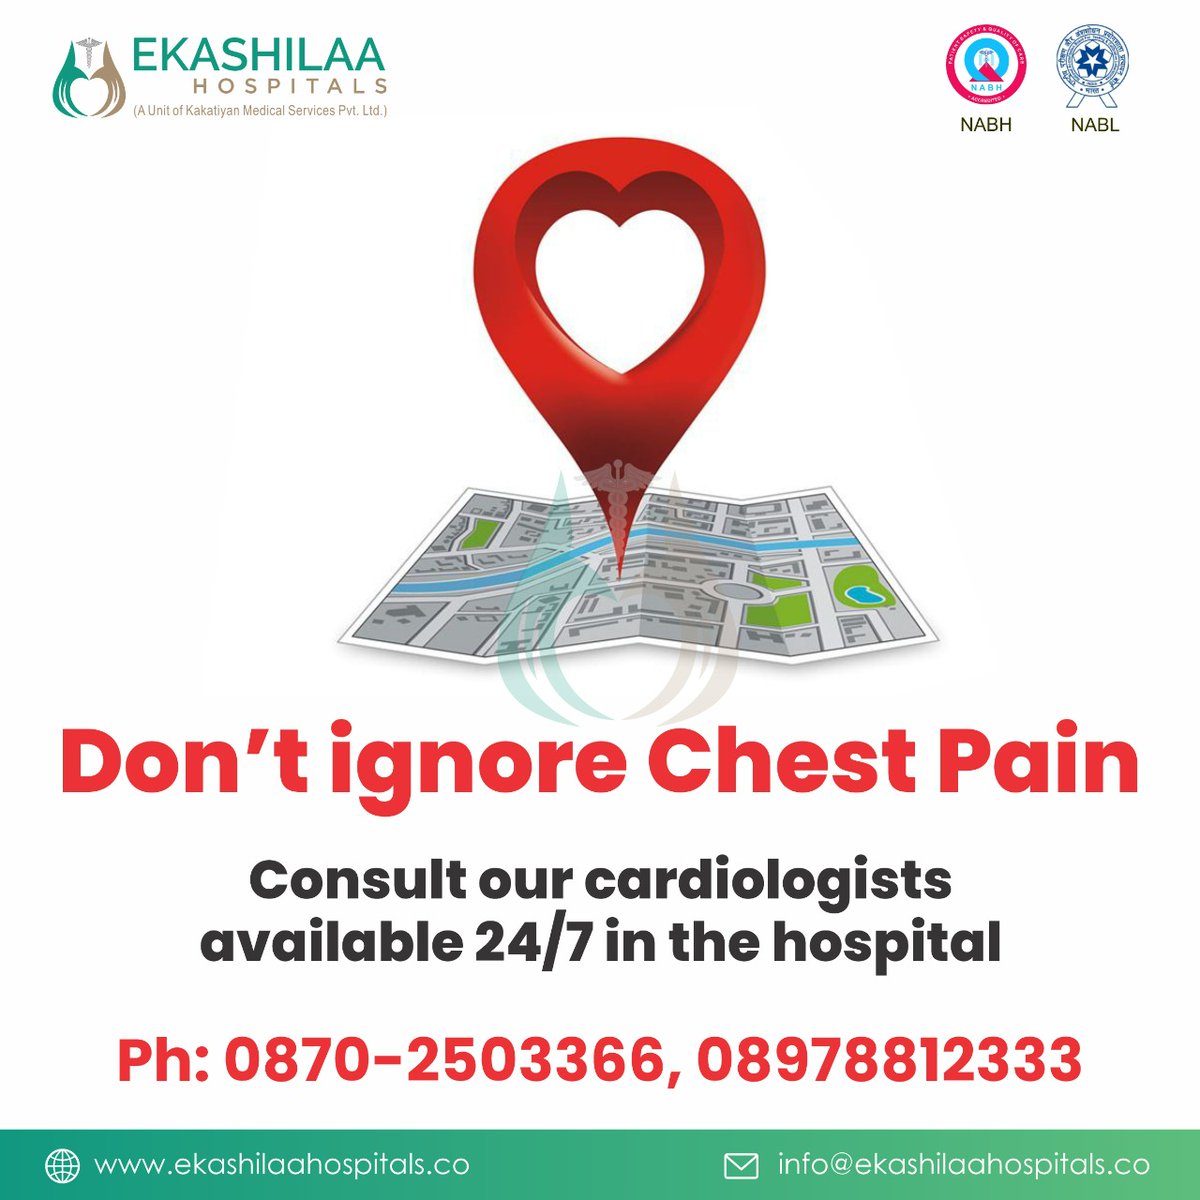 #Chestpain a warning sign you shouldn't ignore
 
Consult our #cardiologist at #EkashilaaHospital 

Book your appointment

Ph:0870-2503366,08978812333

#ekashilaahospitals #ekashilaa #spincaretreatment #chestpain 
#heart #heartcomplications #Warangal #cardiology #gastronomia